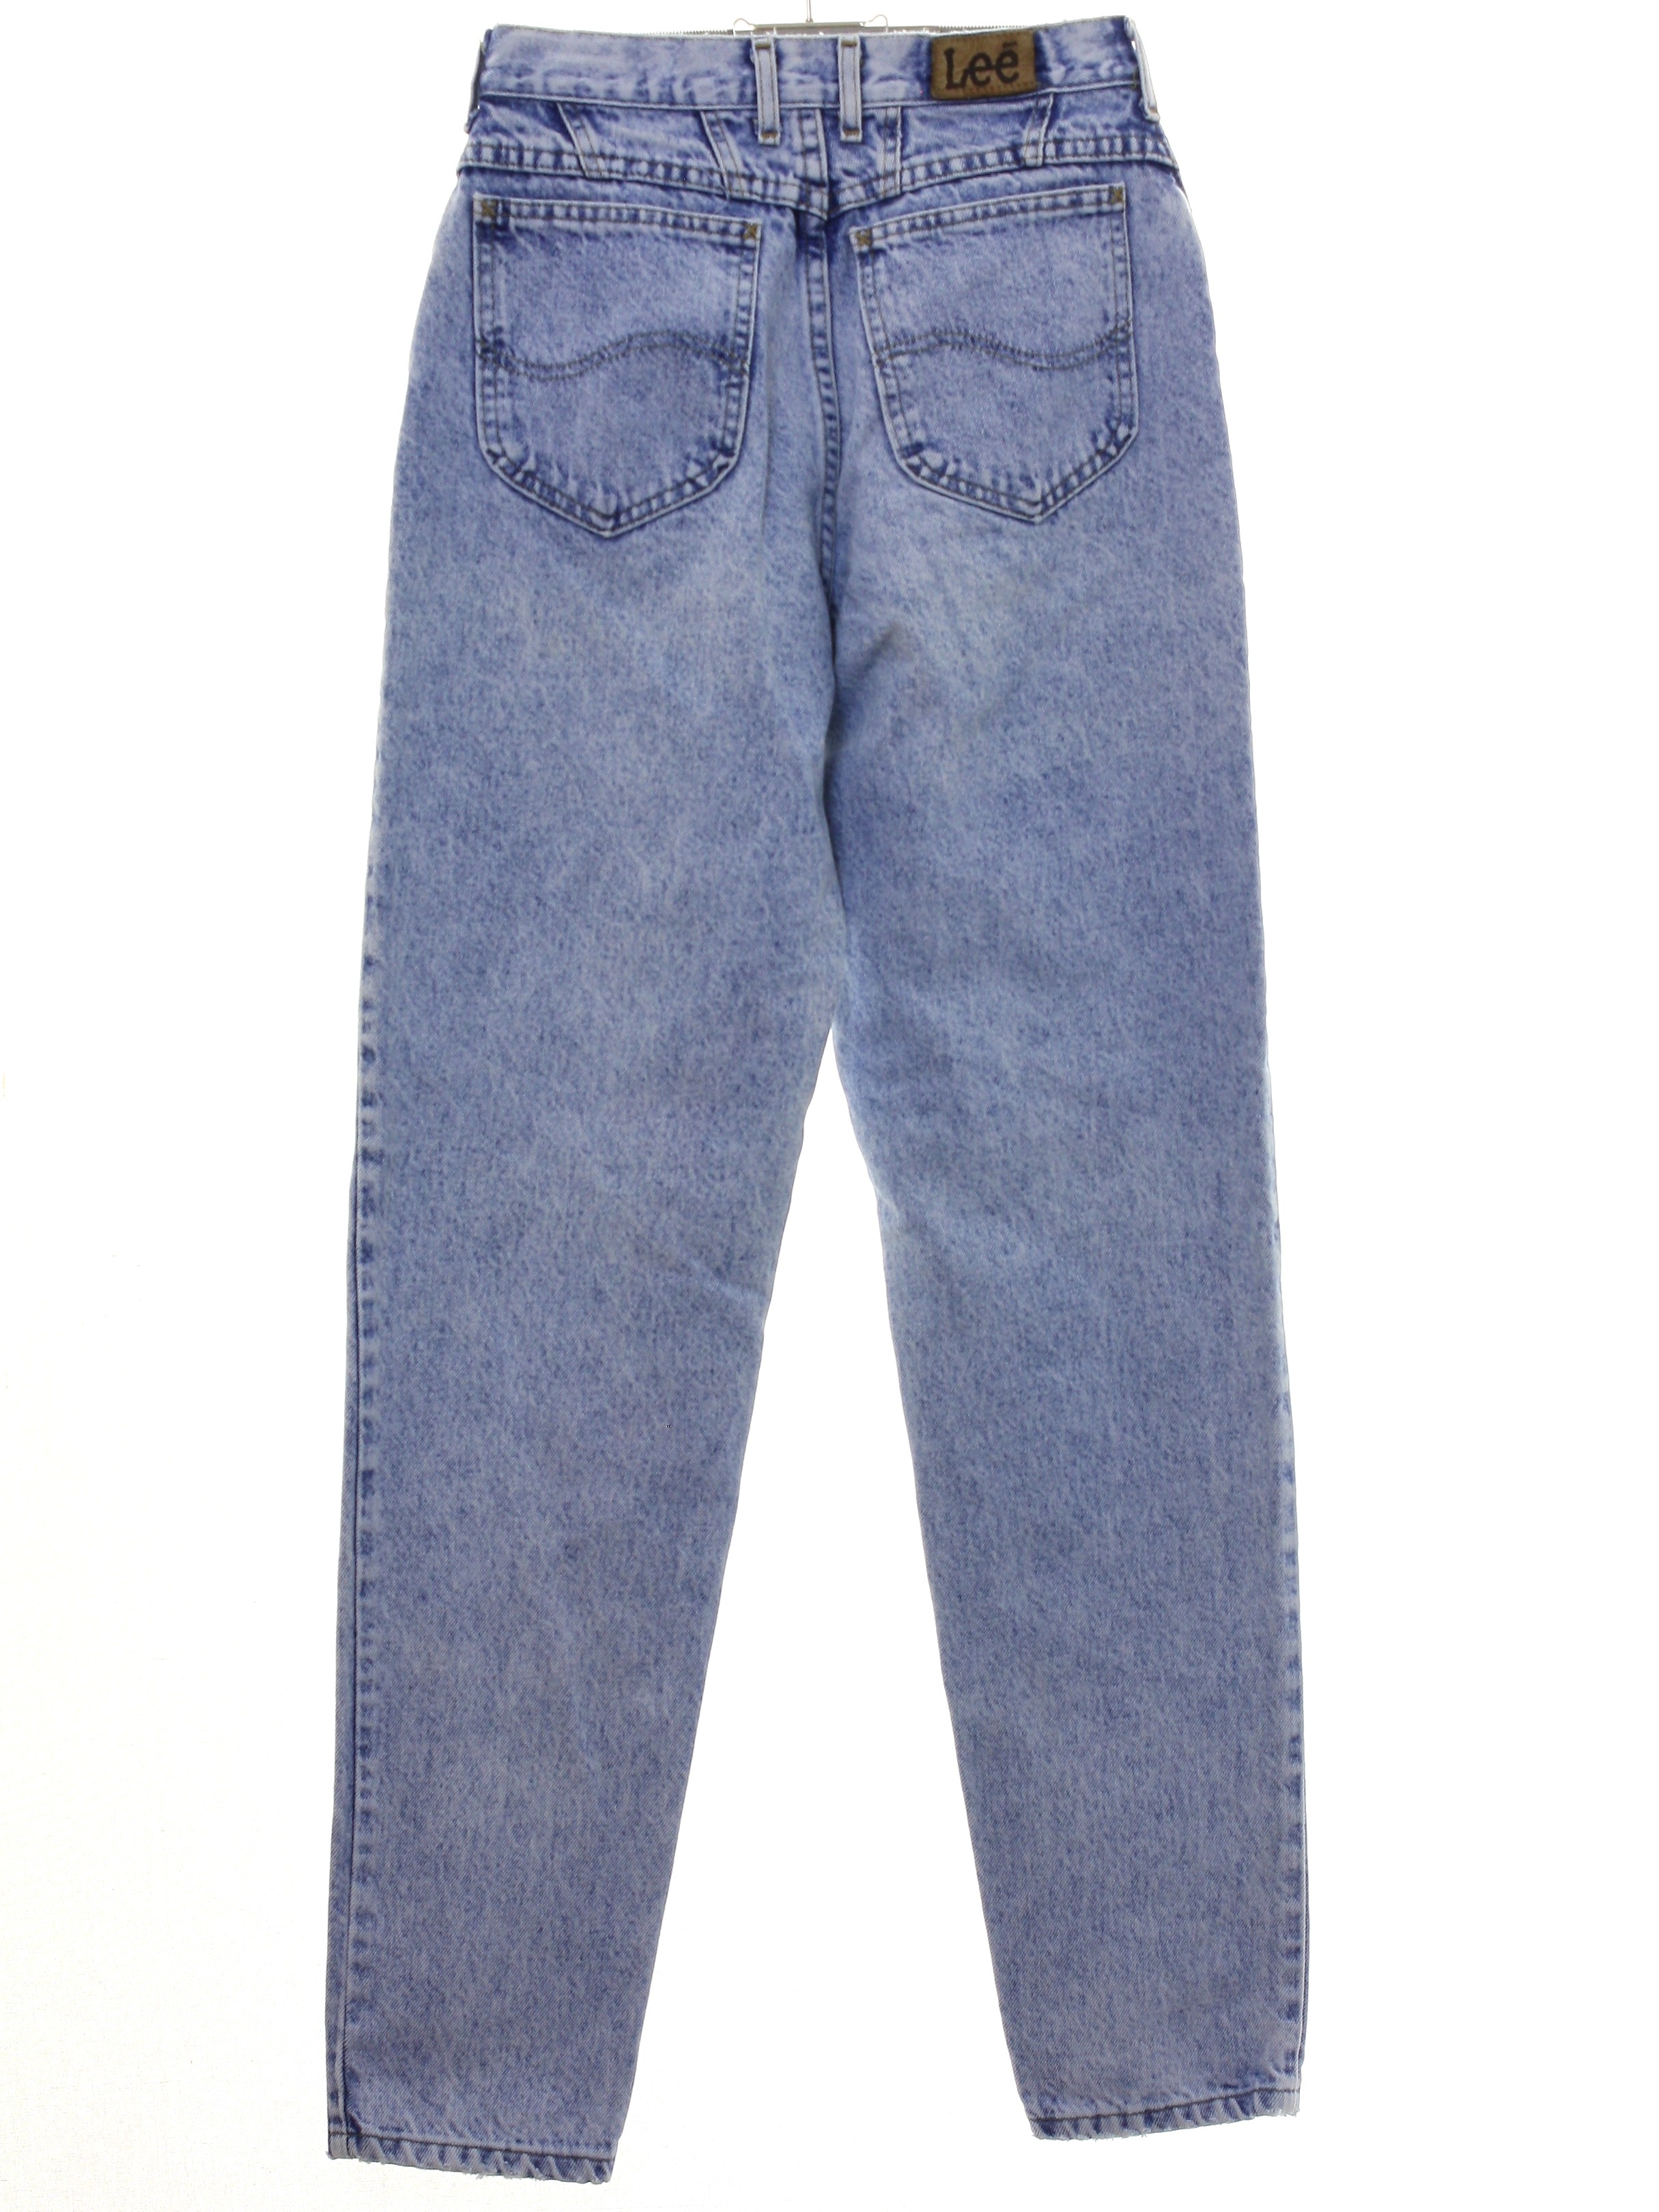 1980s Lee Pants: 80s -Lee- Womens hazy light blue cotton tapered